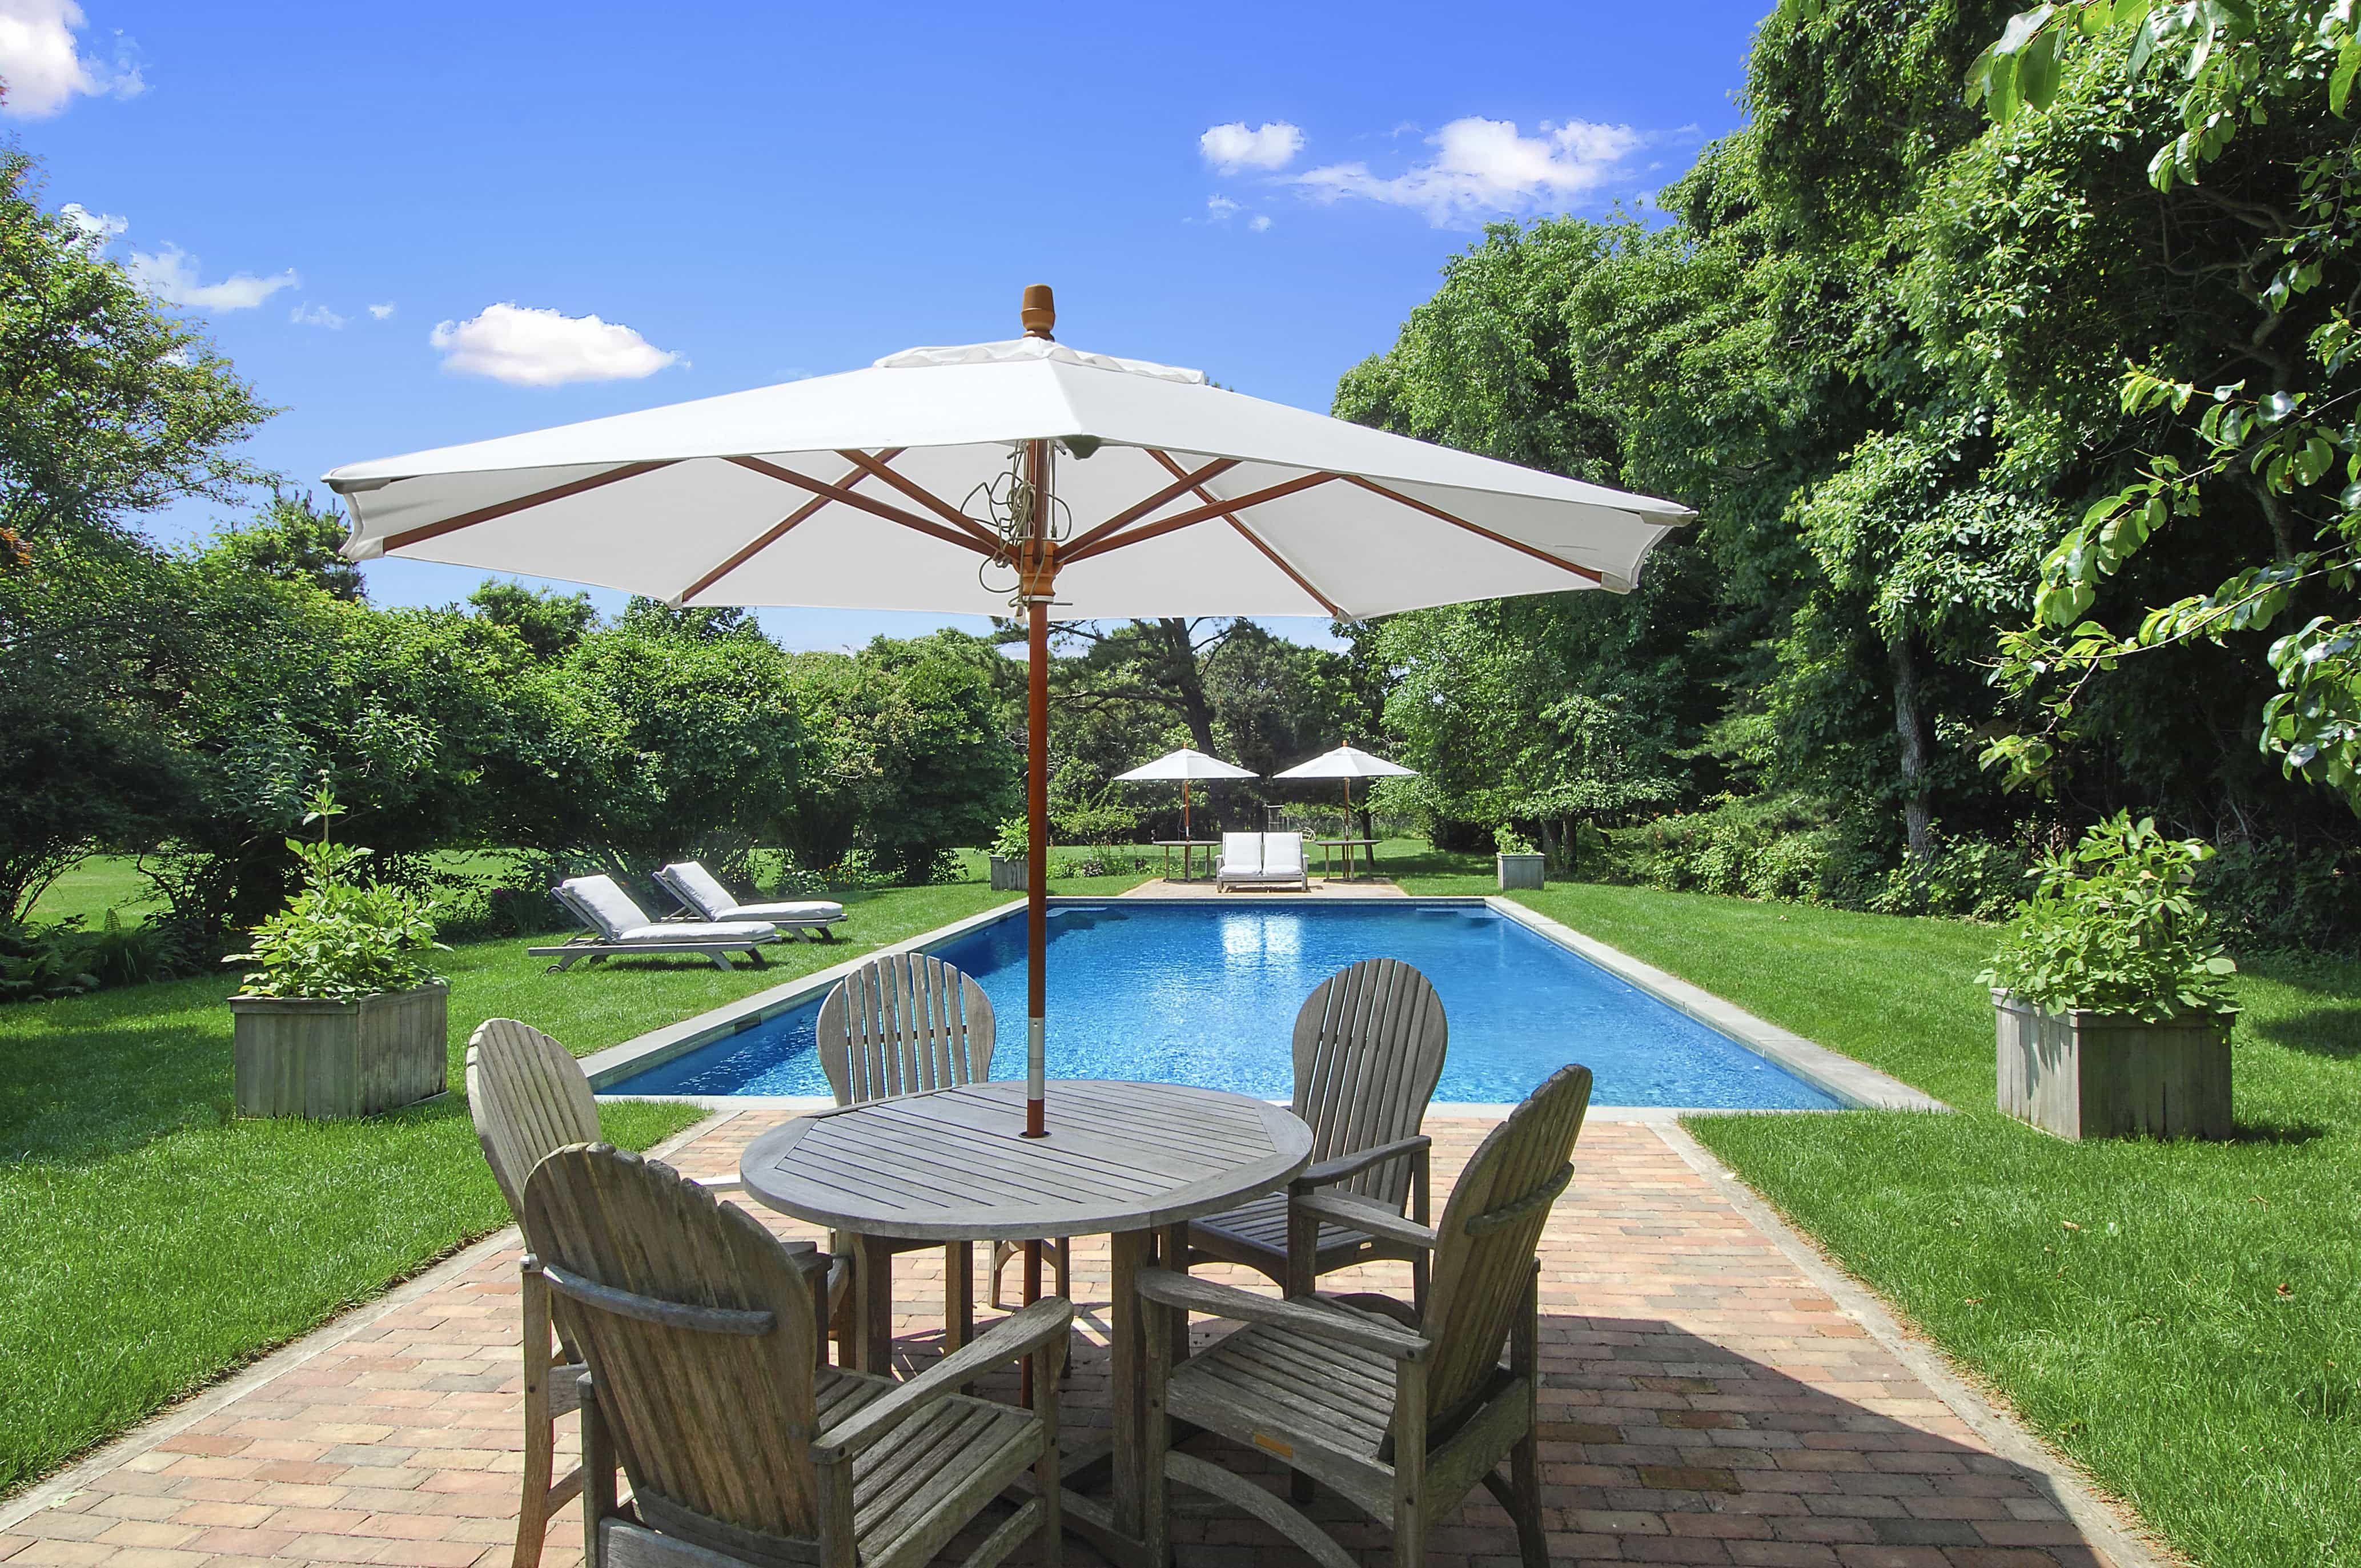 Sunny New York Swimming Pool With Brick Patio And Wooden Outdoor Furniture (View 3 of 25)